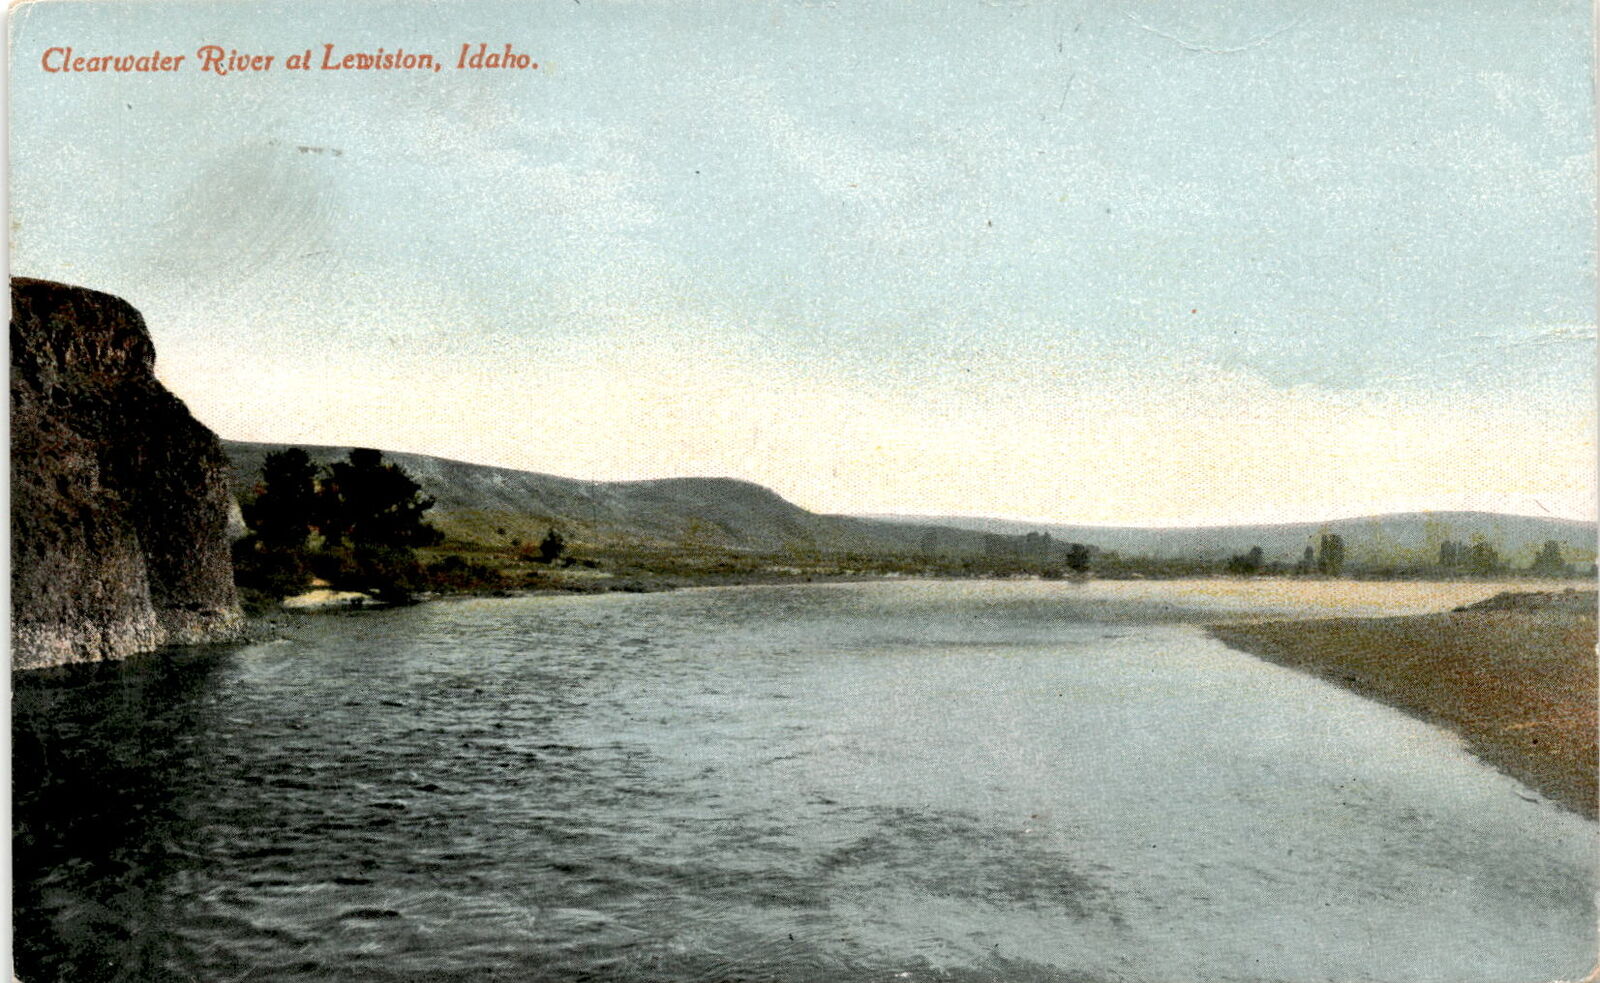 Clearwater River, Lewiston, Idaho, Snake Rivers, north-central Idaho, Postcard